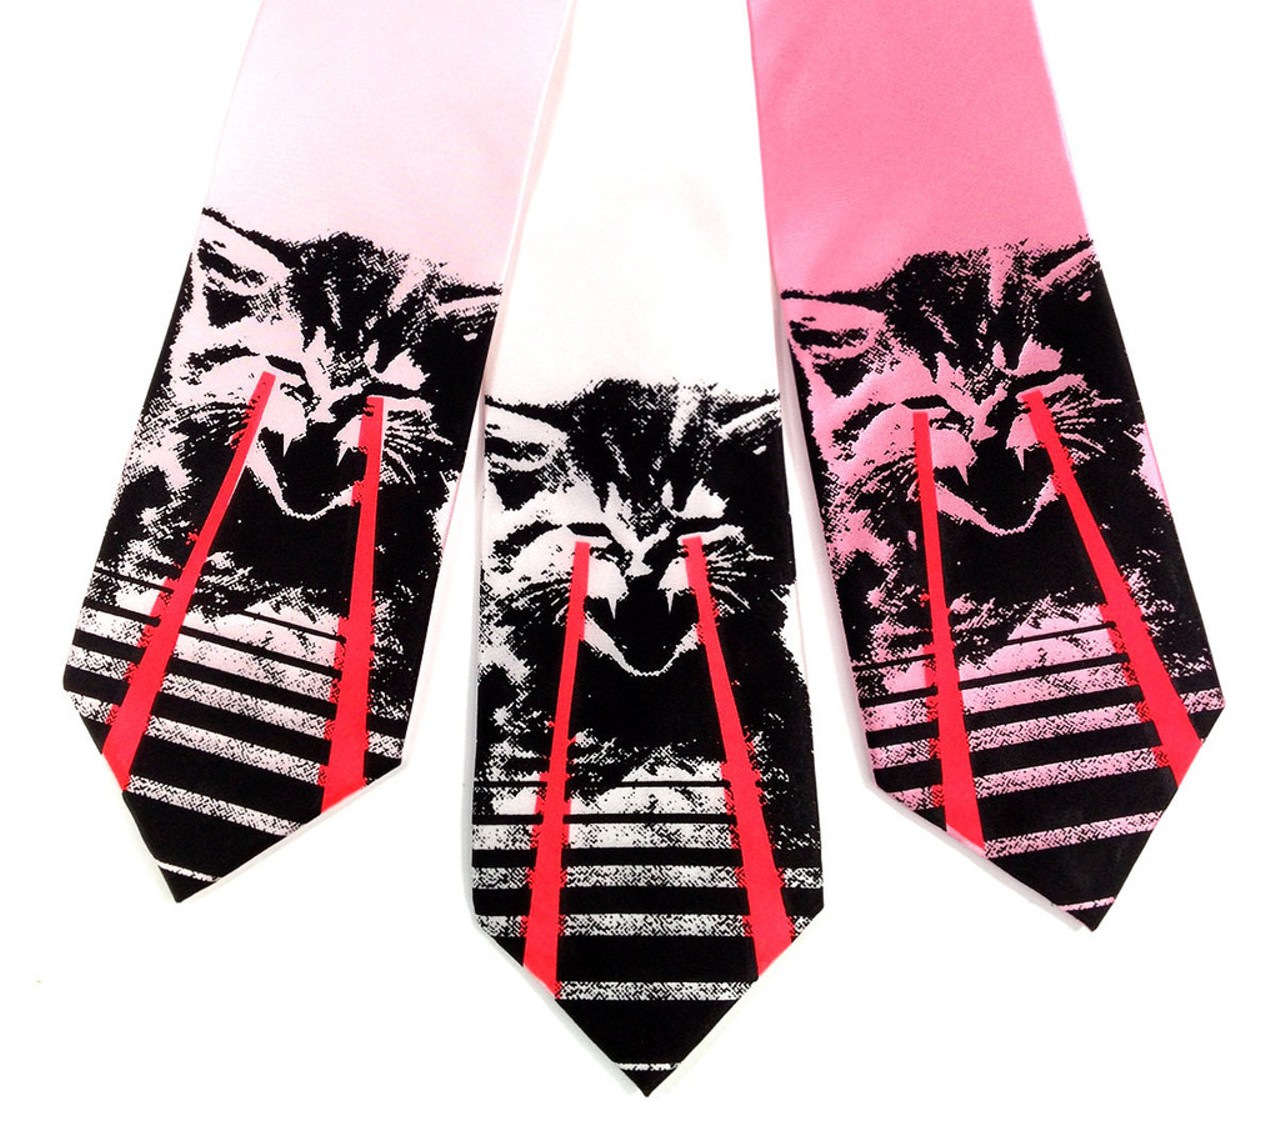 Angry Raving Laser Kitten Silk Necktie -- CyberOptix TieLab will let you design a custom accessory or you get one of these laser kitty ones. Who doesn&#146;t need one of those? $54 (CyberOptix TieLab)